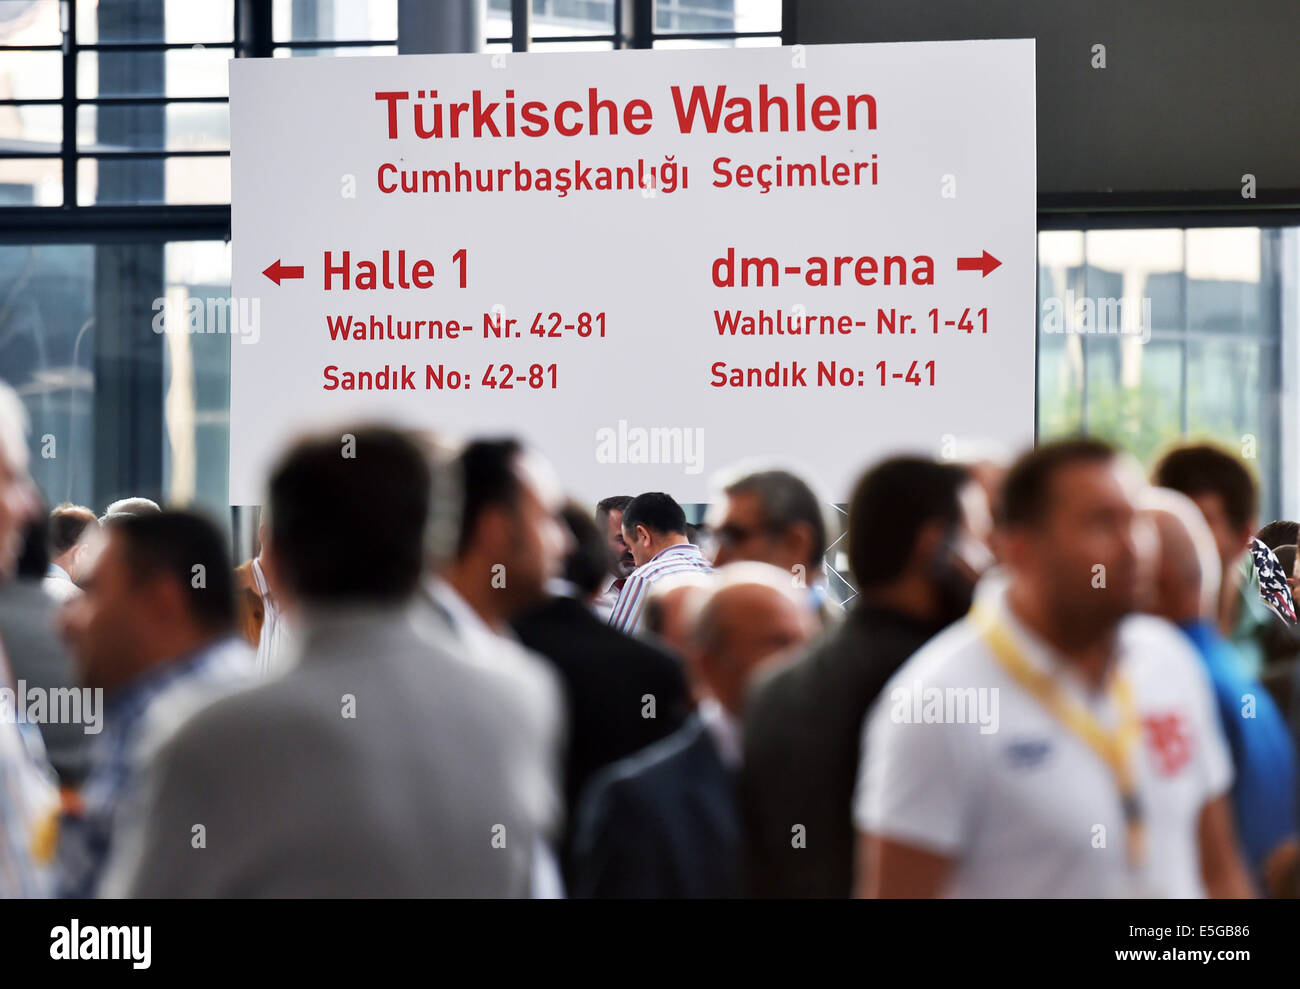 People stand in front of a sign which reads 'Turkish elections' at the exhibition center in Karlsruhe, Germany, 31 July 2014. The voting for the Turkish presidential election started on 31 July for Turkish citizens living abroad. The presidential election in Turkey has been scheduled for 10 August 2014. Photo: ULI DECK/dpa Stock Photo